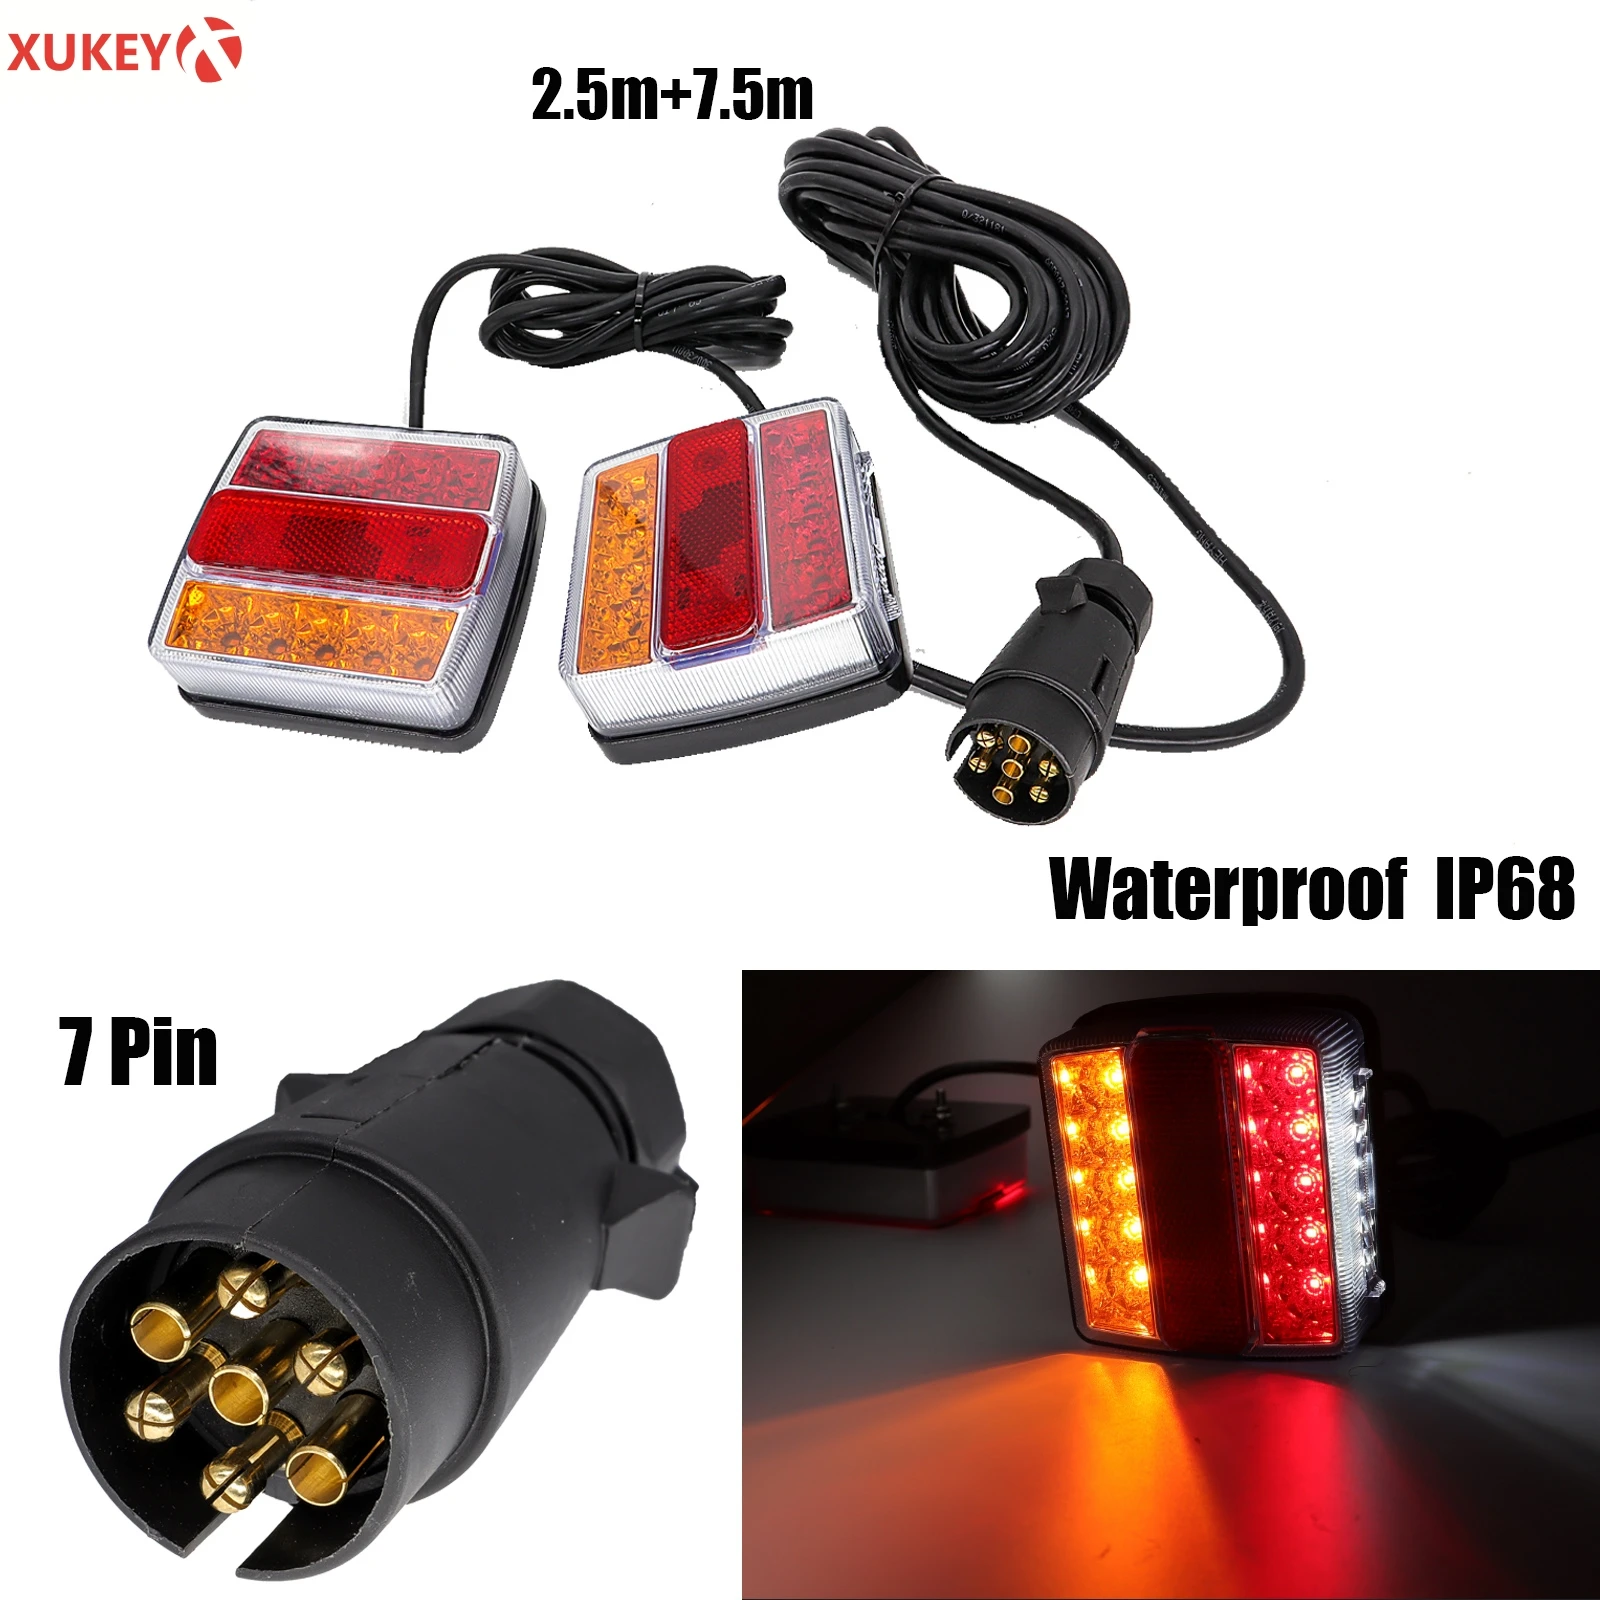 1 Set 10m 7 Pin Plug 12V 16 Led Trailer Towing Light Kit Rear Stop Tail Turn Signal Lights License Number Plate Lamp Truck RV magnetic led trailer rear lights set 12 v wired brake light truck trailer lighting 7 5m cable 7pin plug trailers caravans truck